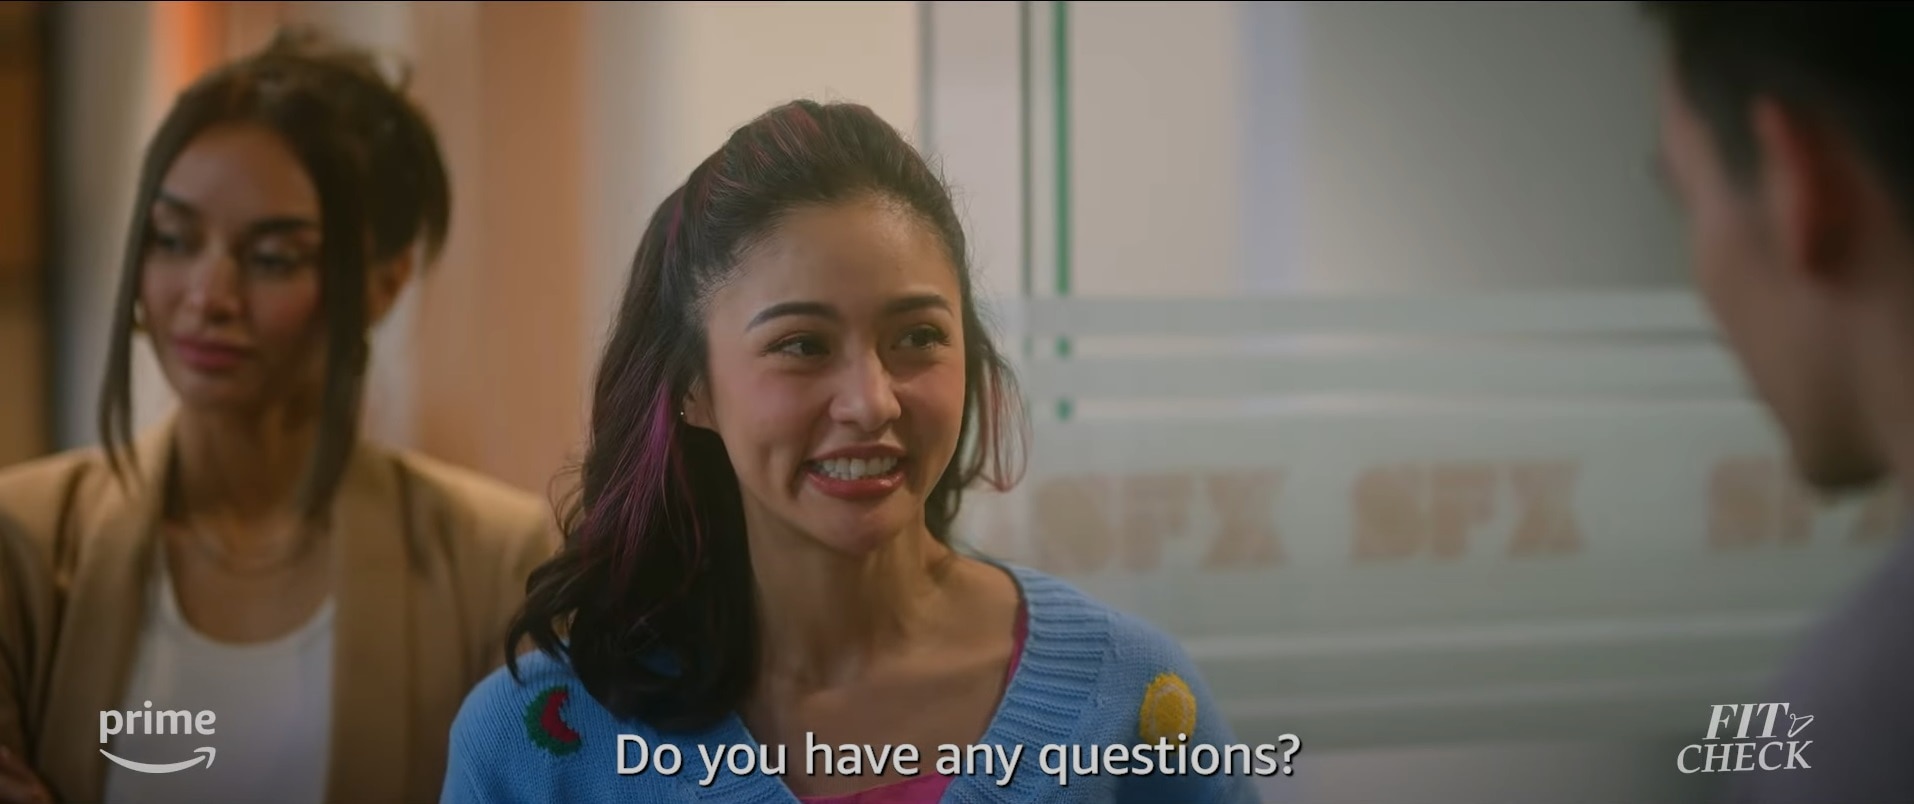 Kim Chiu, Jake Ejercito proud to showcase Philippines to foreign audiences  in Prime Video series